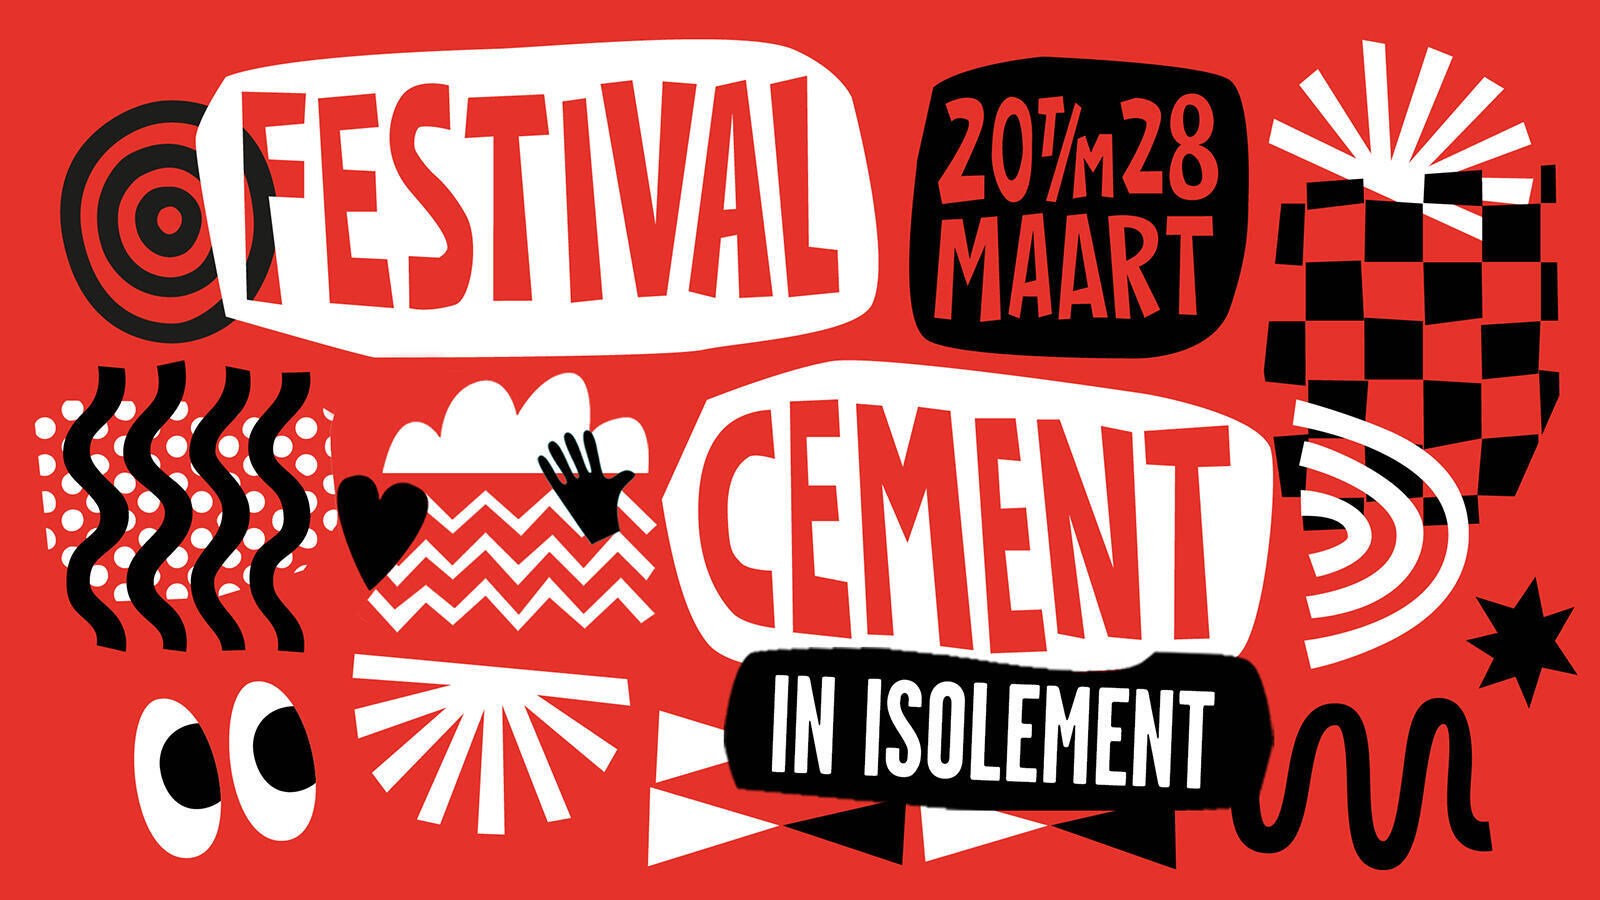 Festival Cement in Isolement